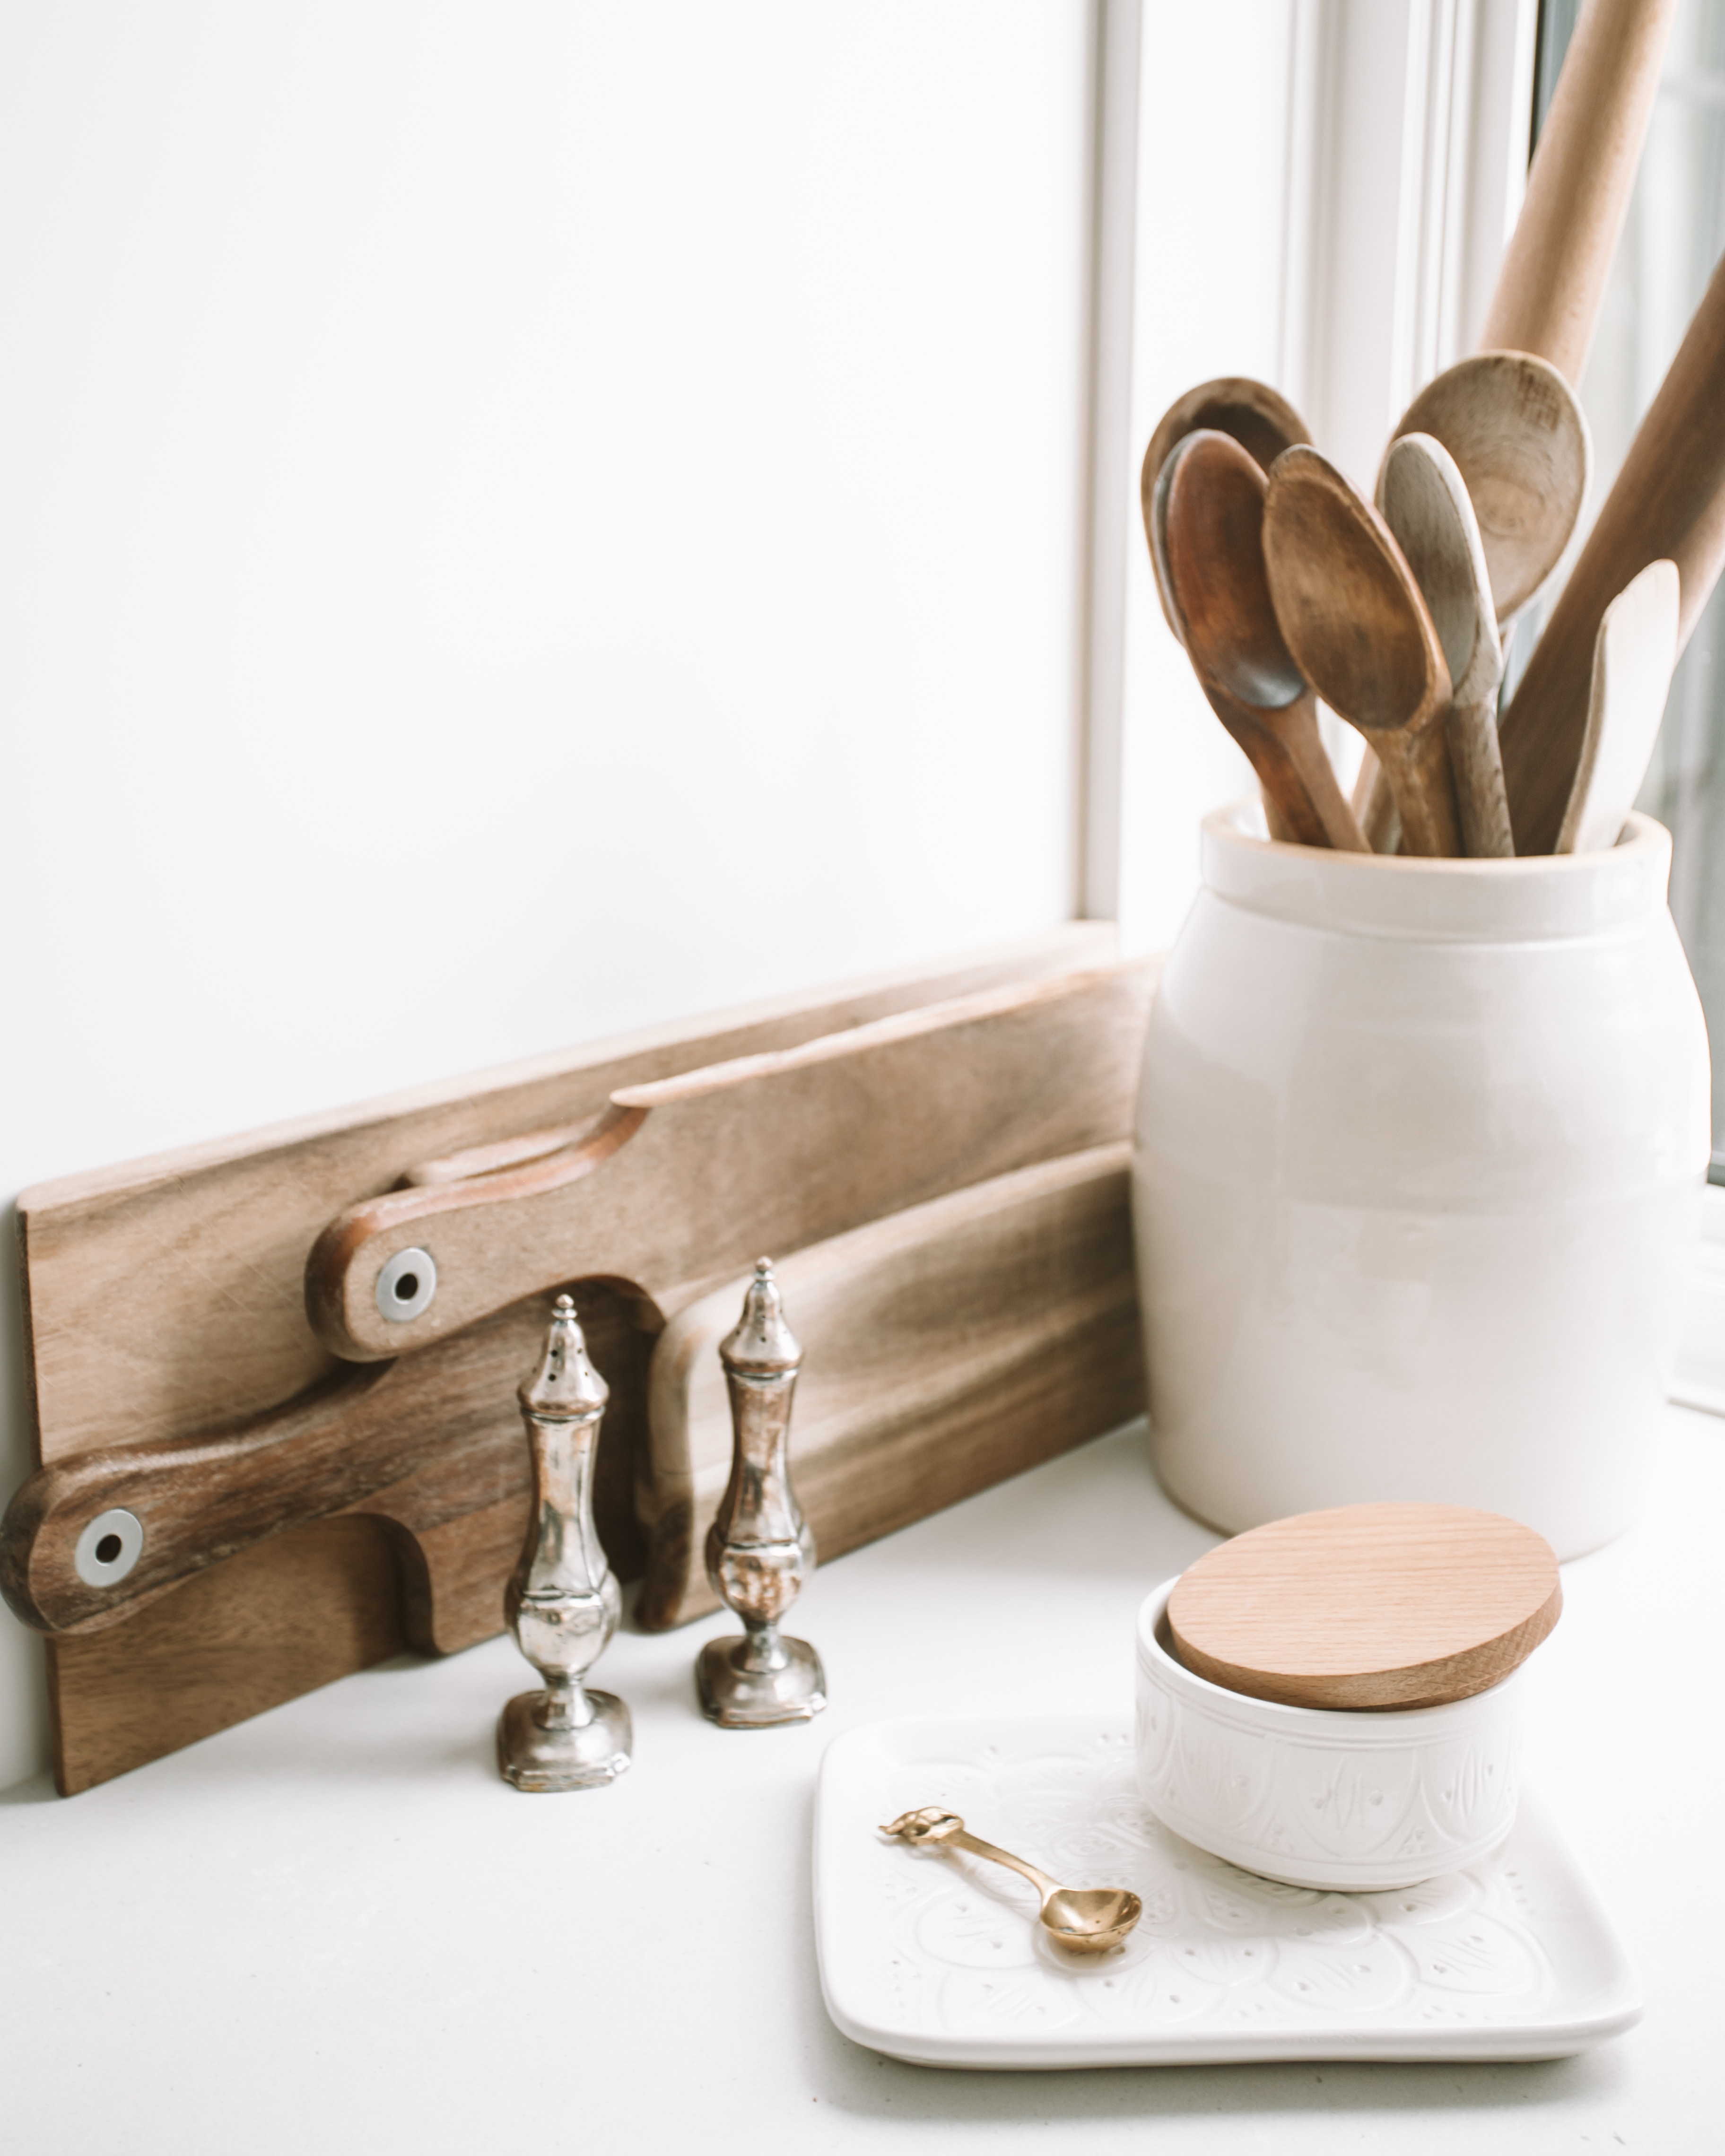 Elevate your kitchen with sustainable bamboo home products